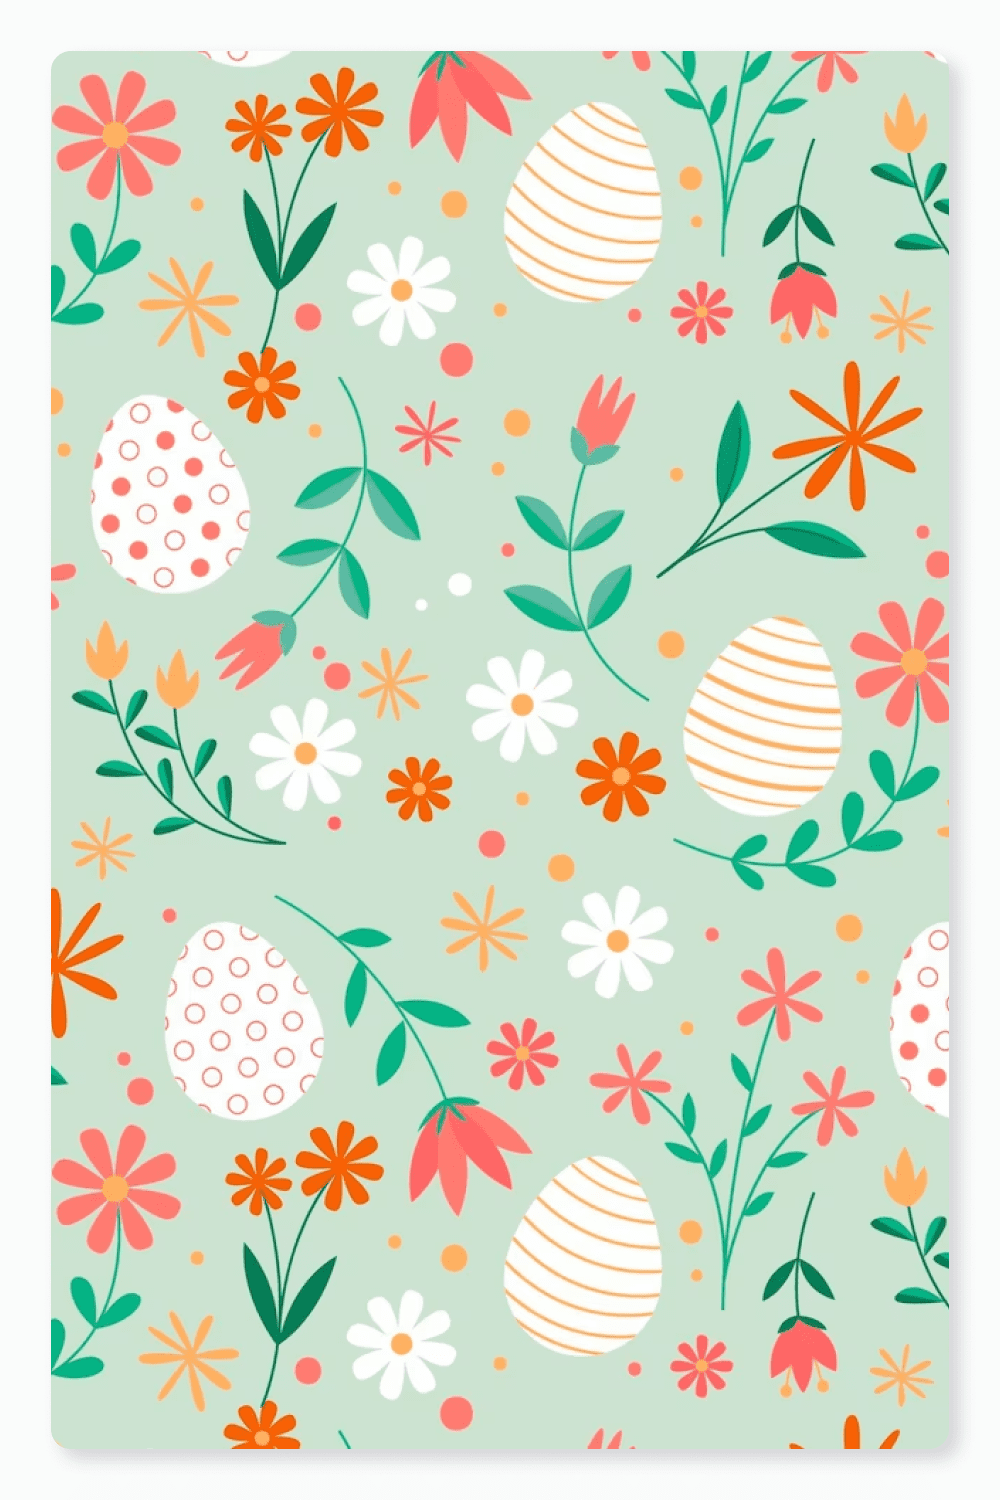 Collage of images of Easter eggs and flowers.